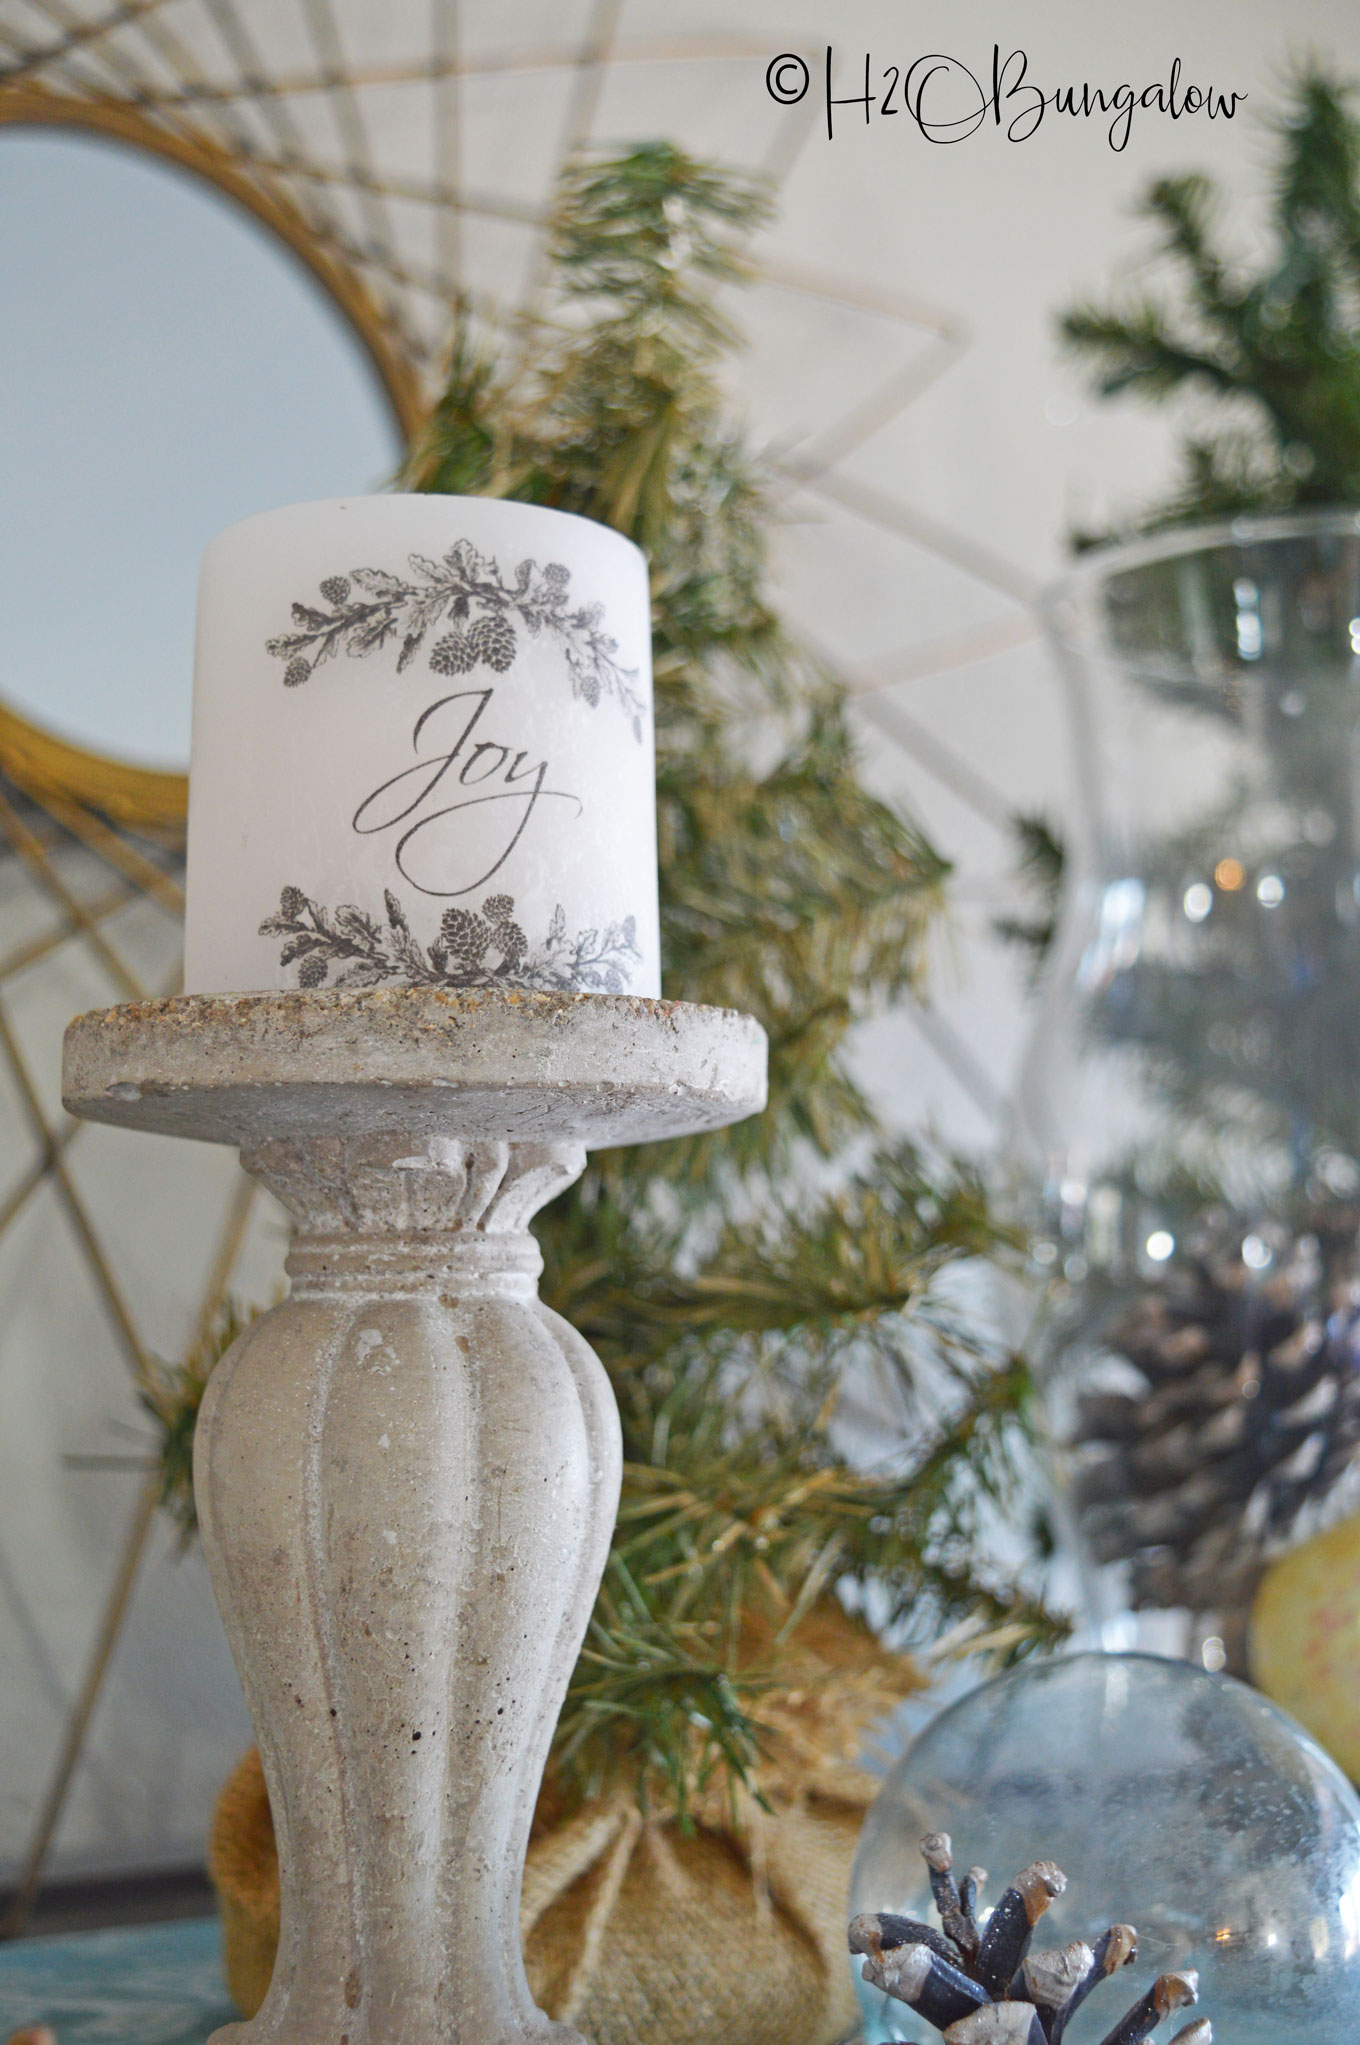 H2OBungalow Christmas home tour at the beach with several neutral holiday decor DIY projects and tutorials.